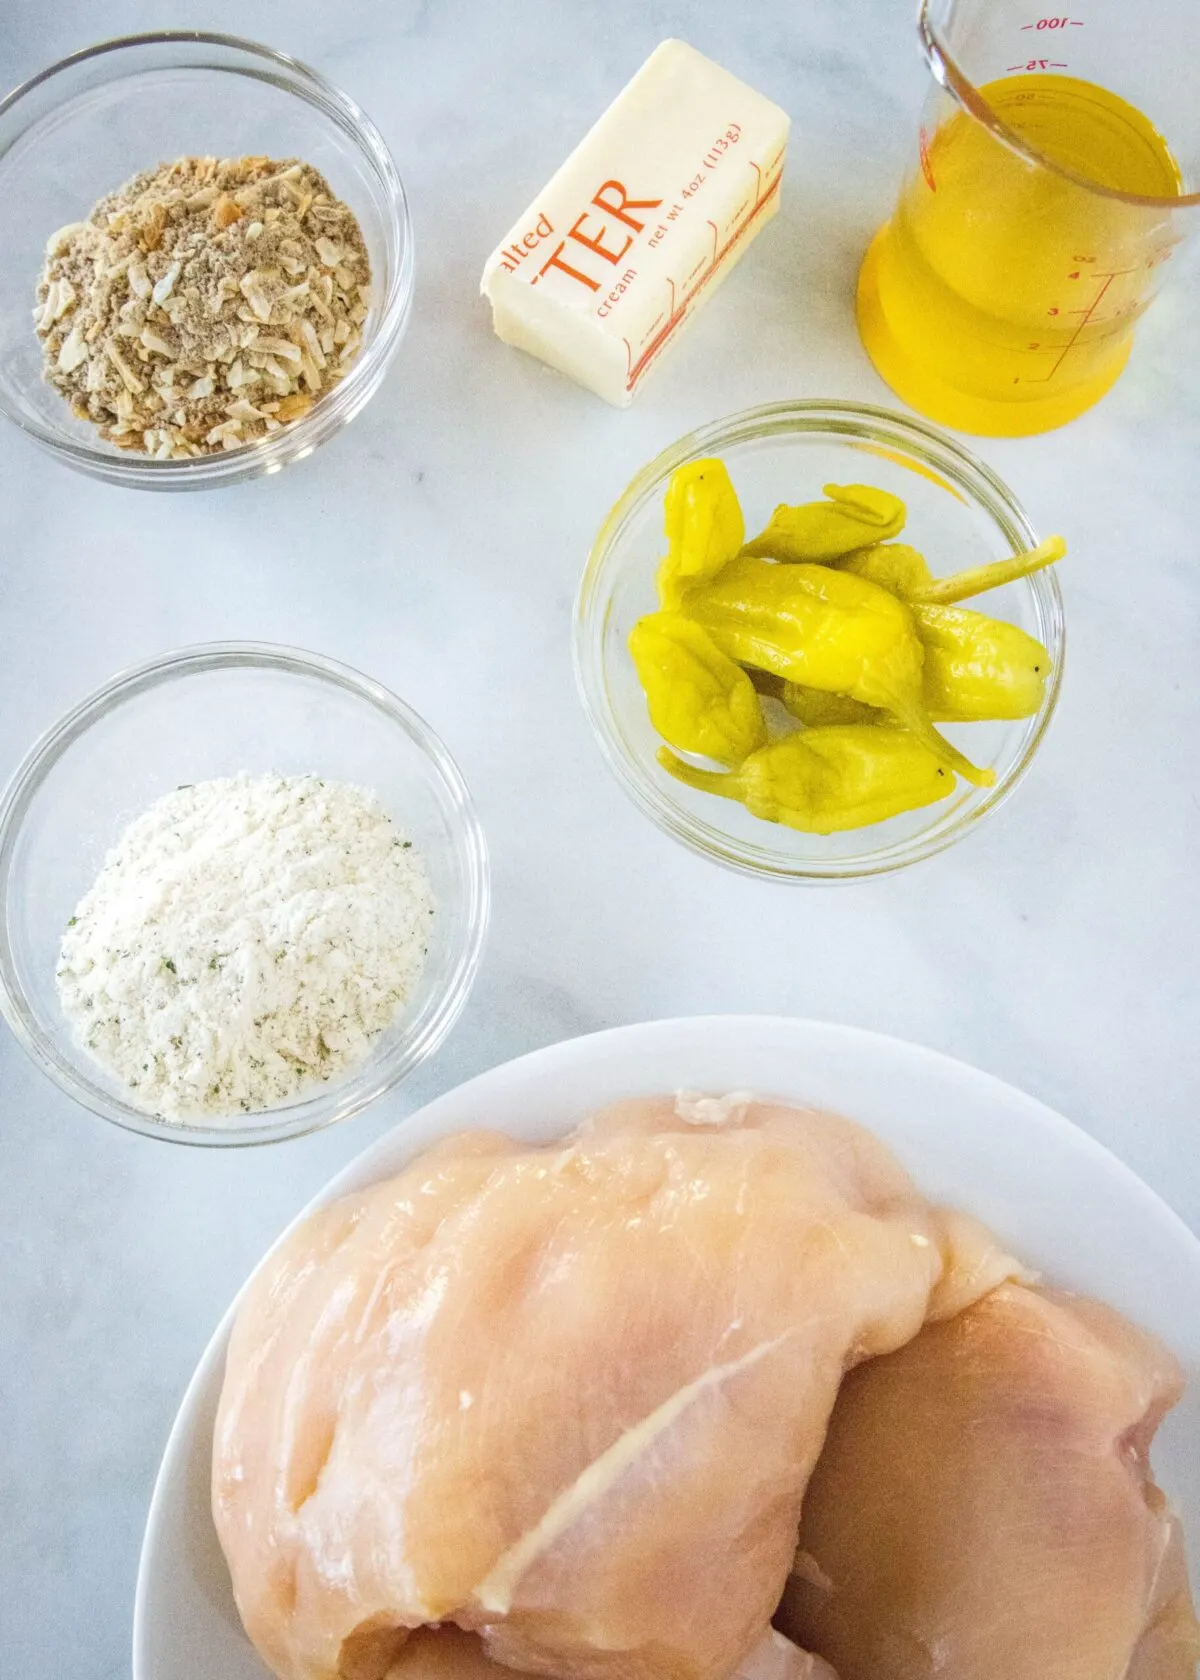 Overhead view of the ingredients needed for Mississippi chicken: a plate of raw chicken breasts, a bowl of ranch dressing mix, a bowl of onion soup mix, a bowl of pepperoncini peppers, a glass of pepperoncini juice, and half a stick of butter